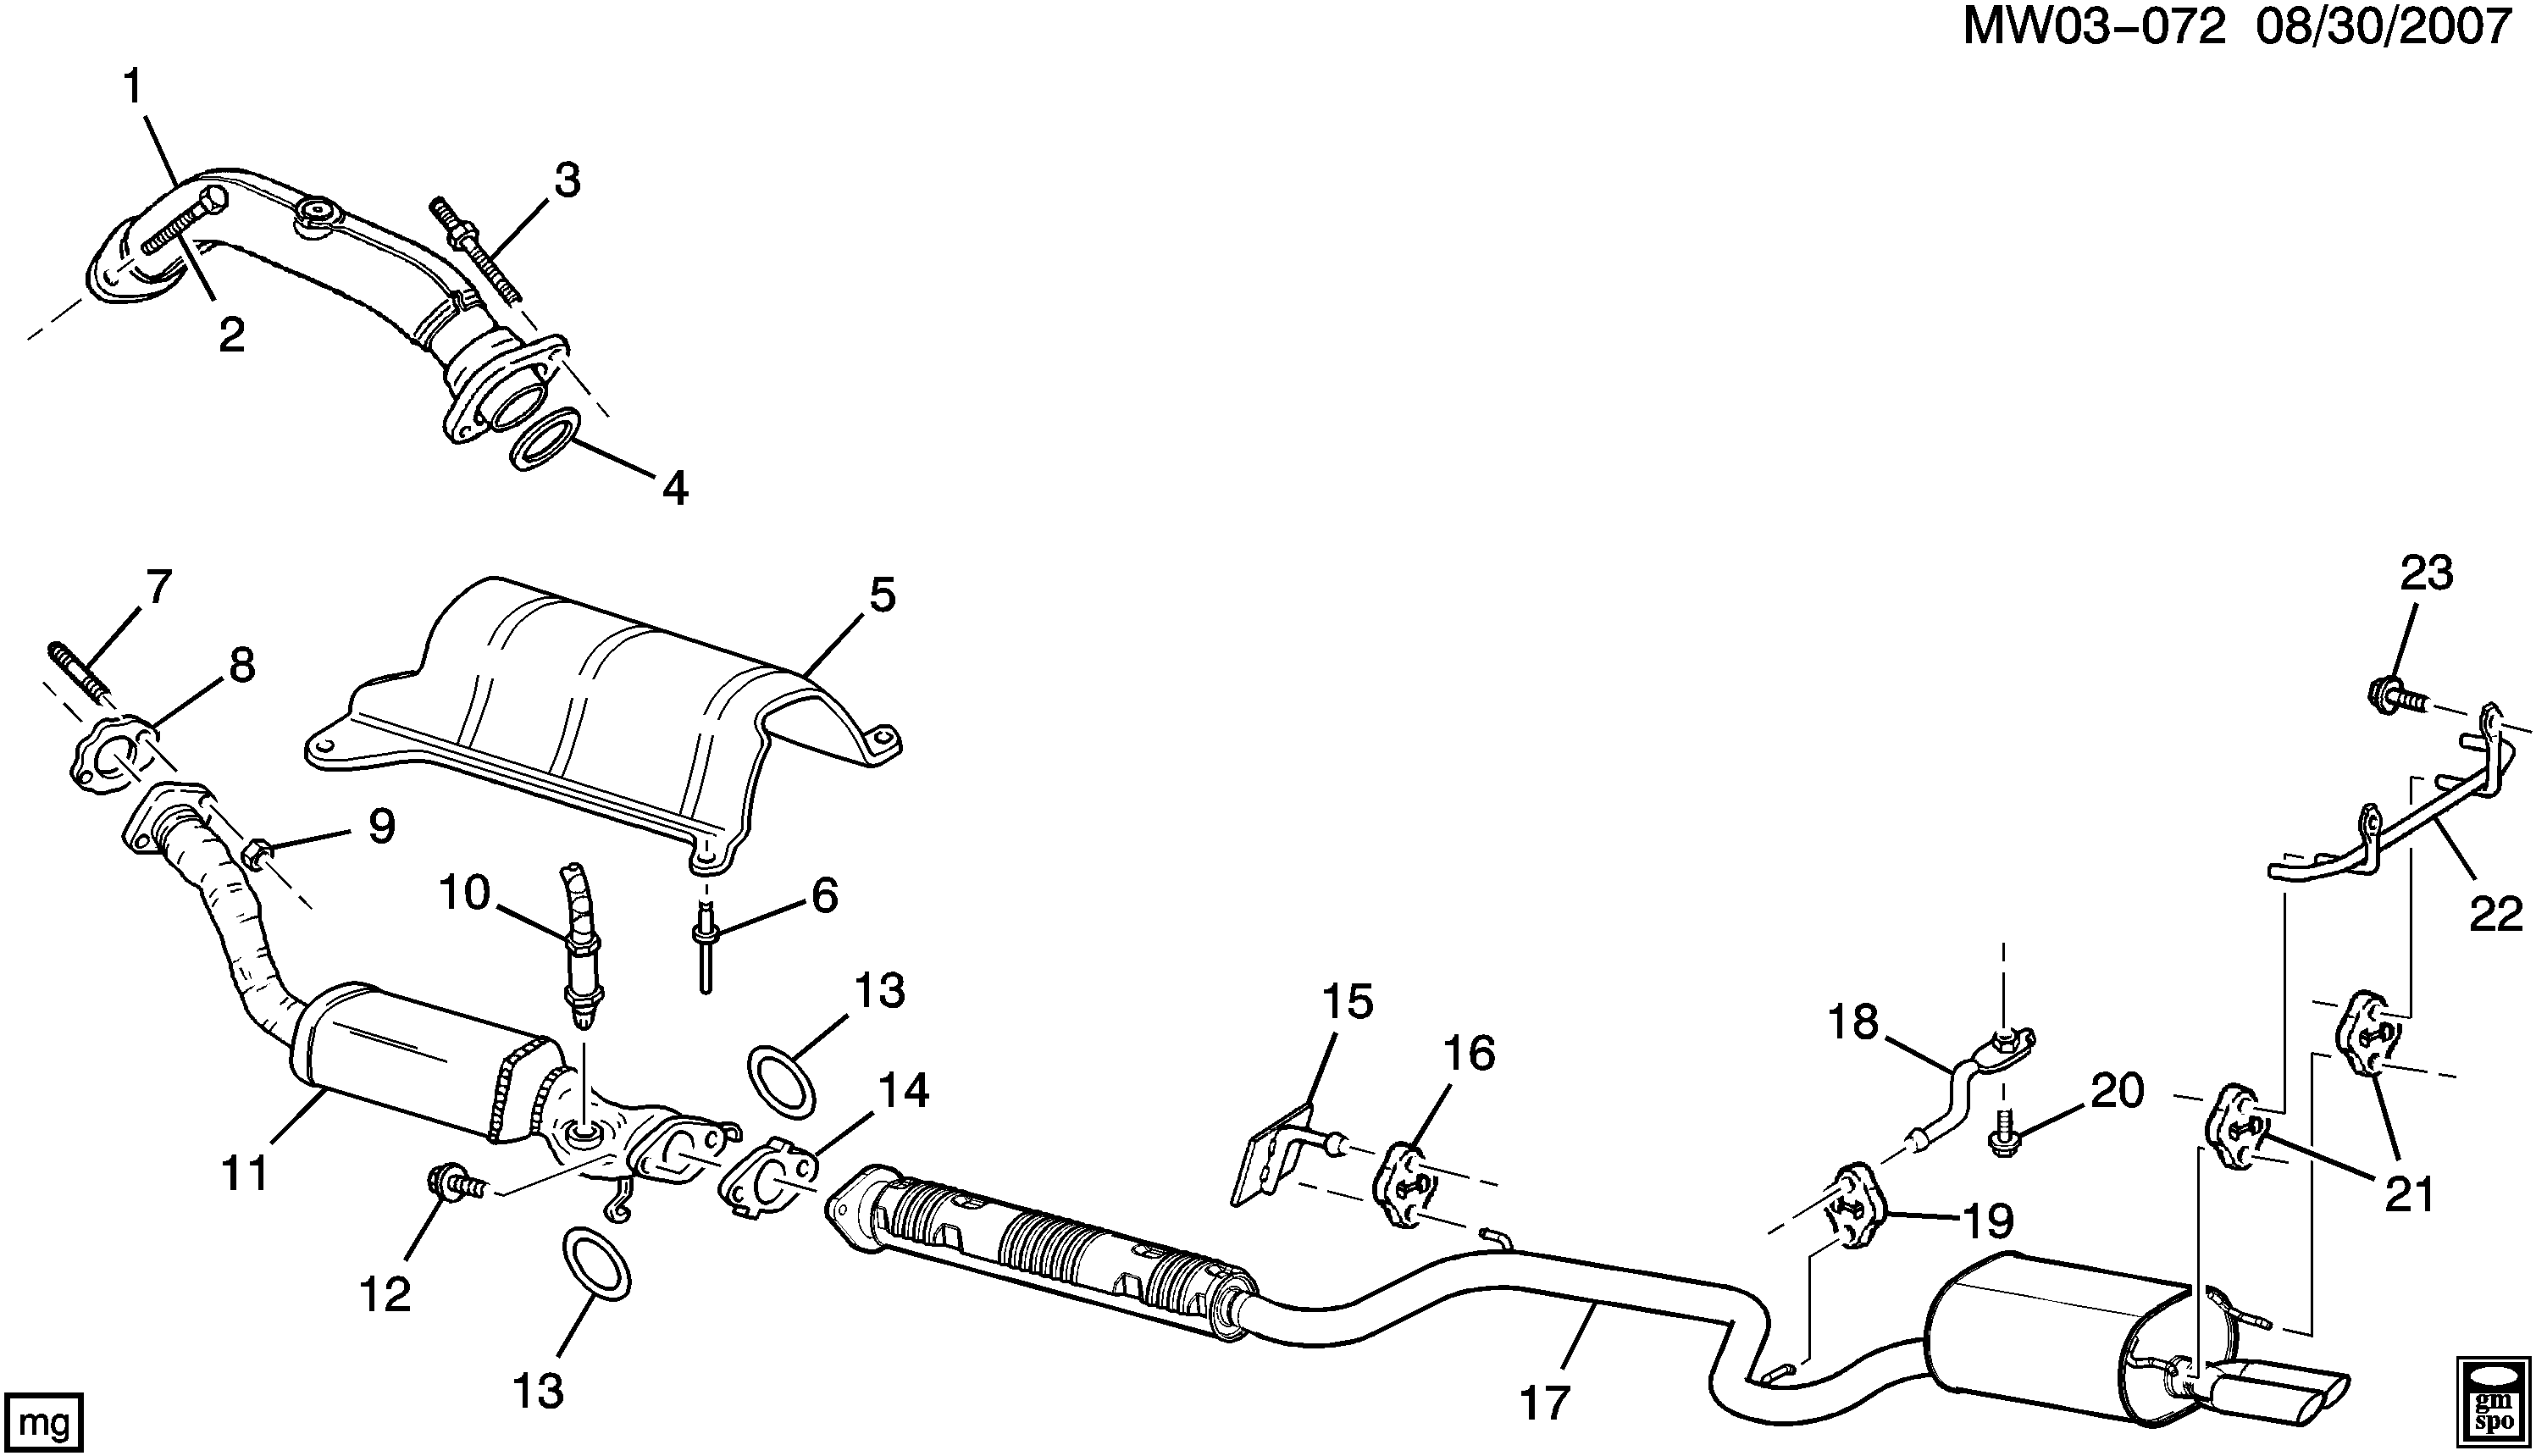 1999-2002 WF EXHAUST SYSTEM (L67/3.8-1)